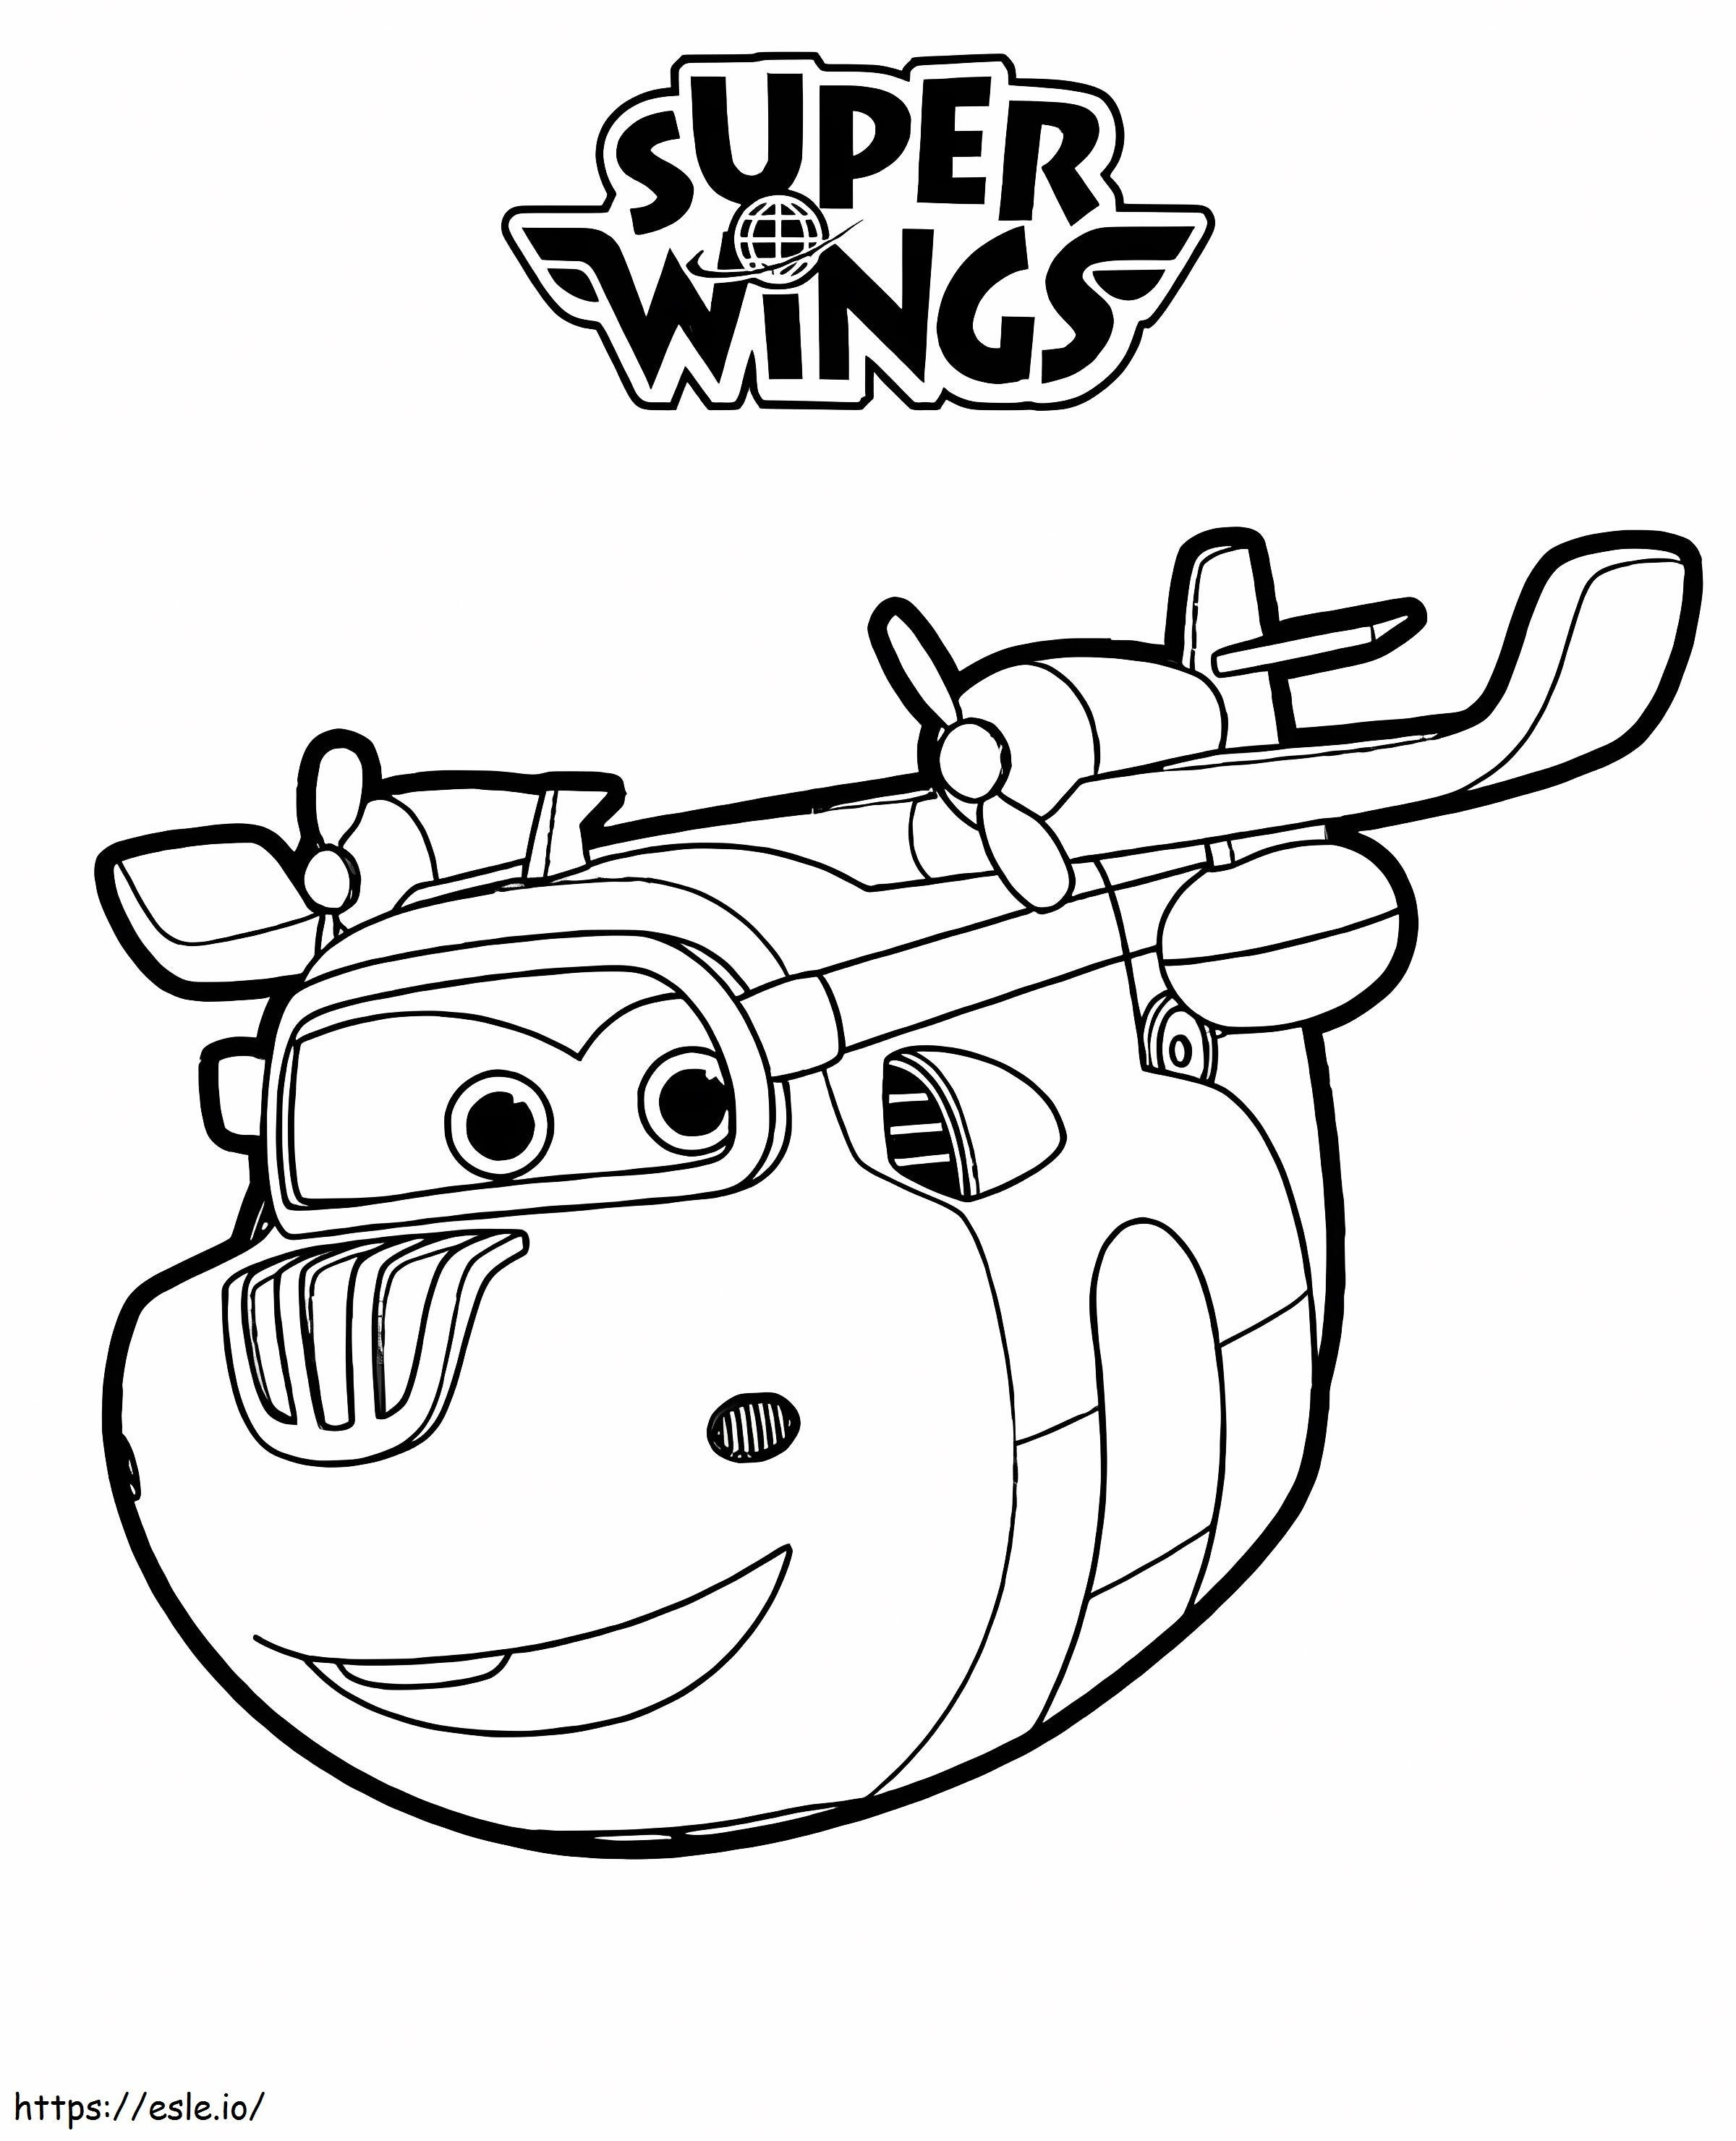 Donnie Super Wings Smiling coloring page